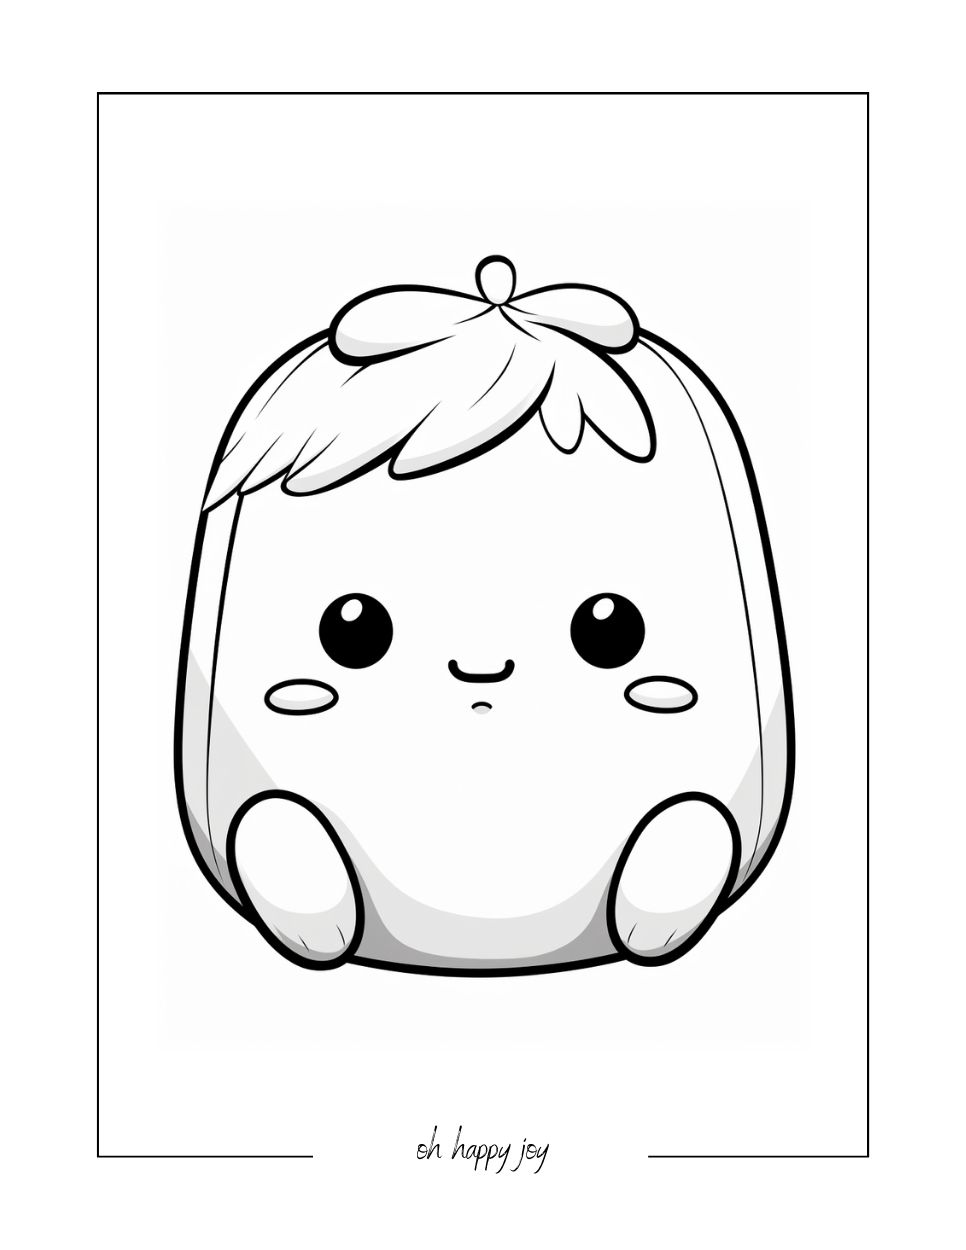 Pumpkin squishmallow coloring page